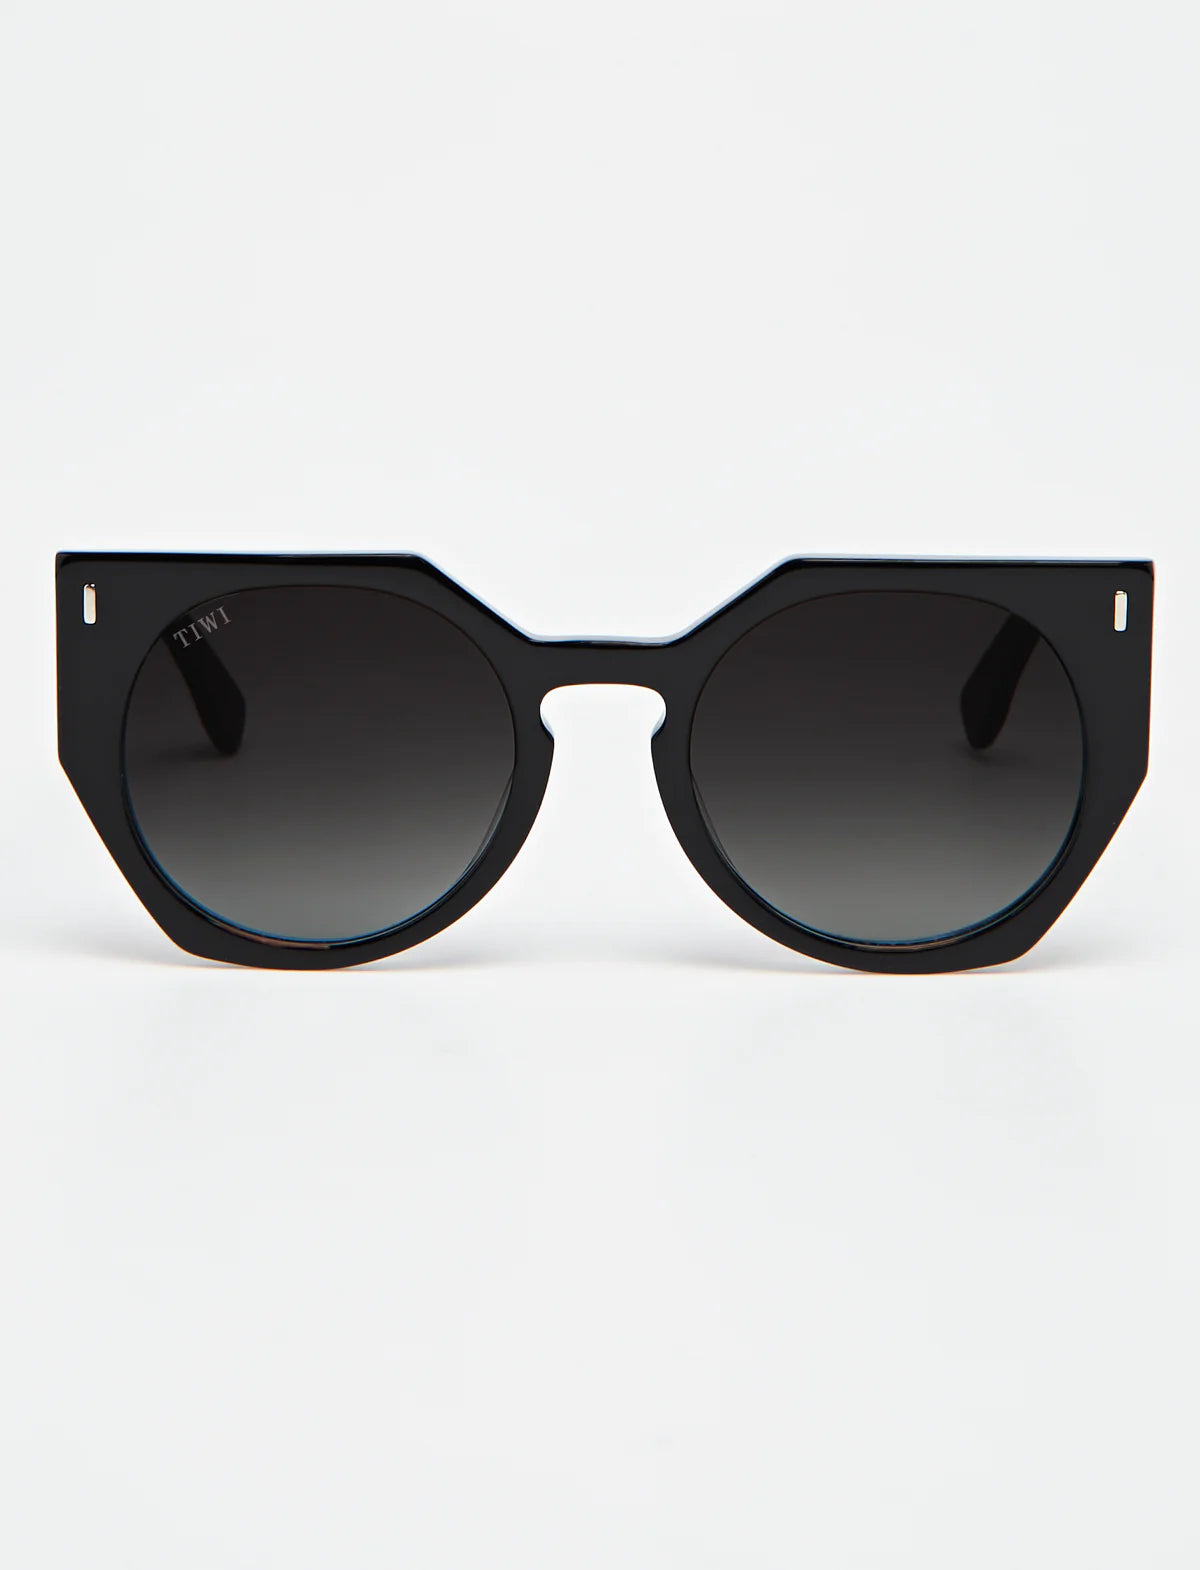 Limited Edition - Collection 1/300 Sunglasses TIWI USA Venus Black Limited Edition 1/300  